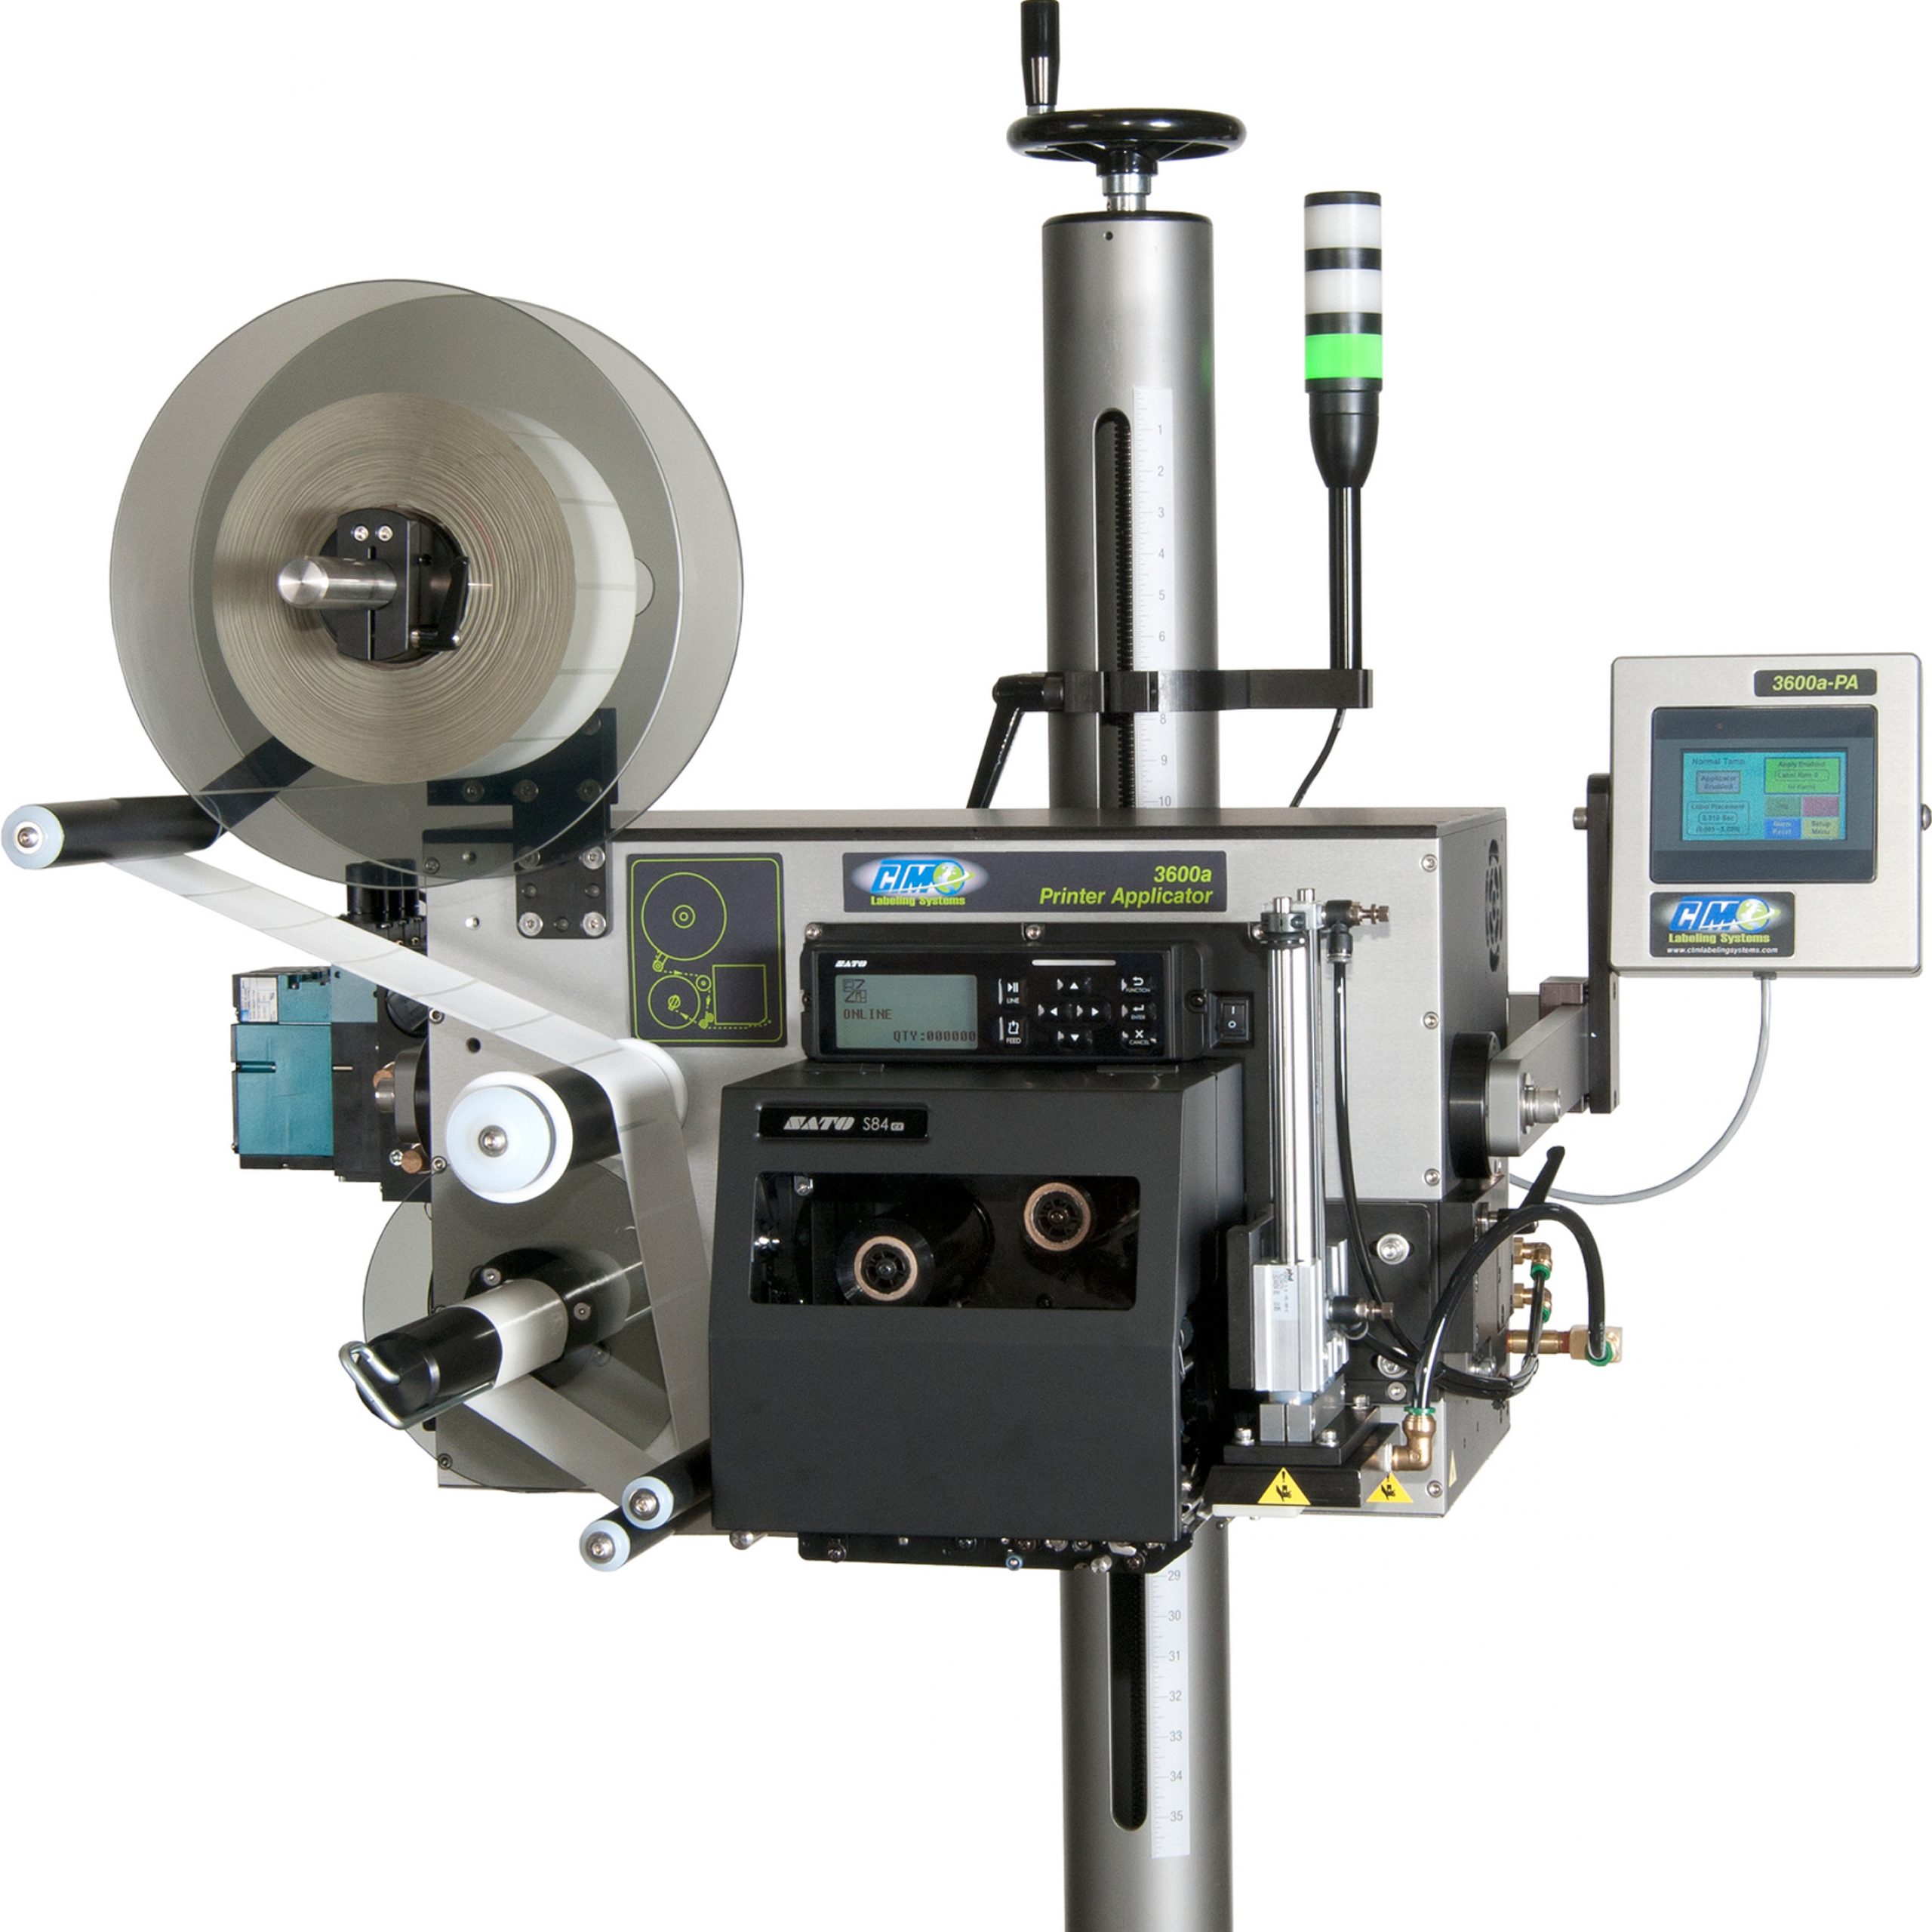 CTM Labeling Systems' 3600a-PA Printer Applicator